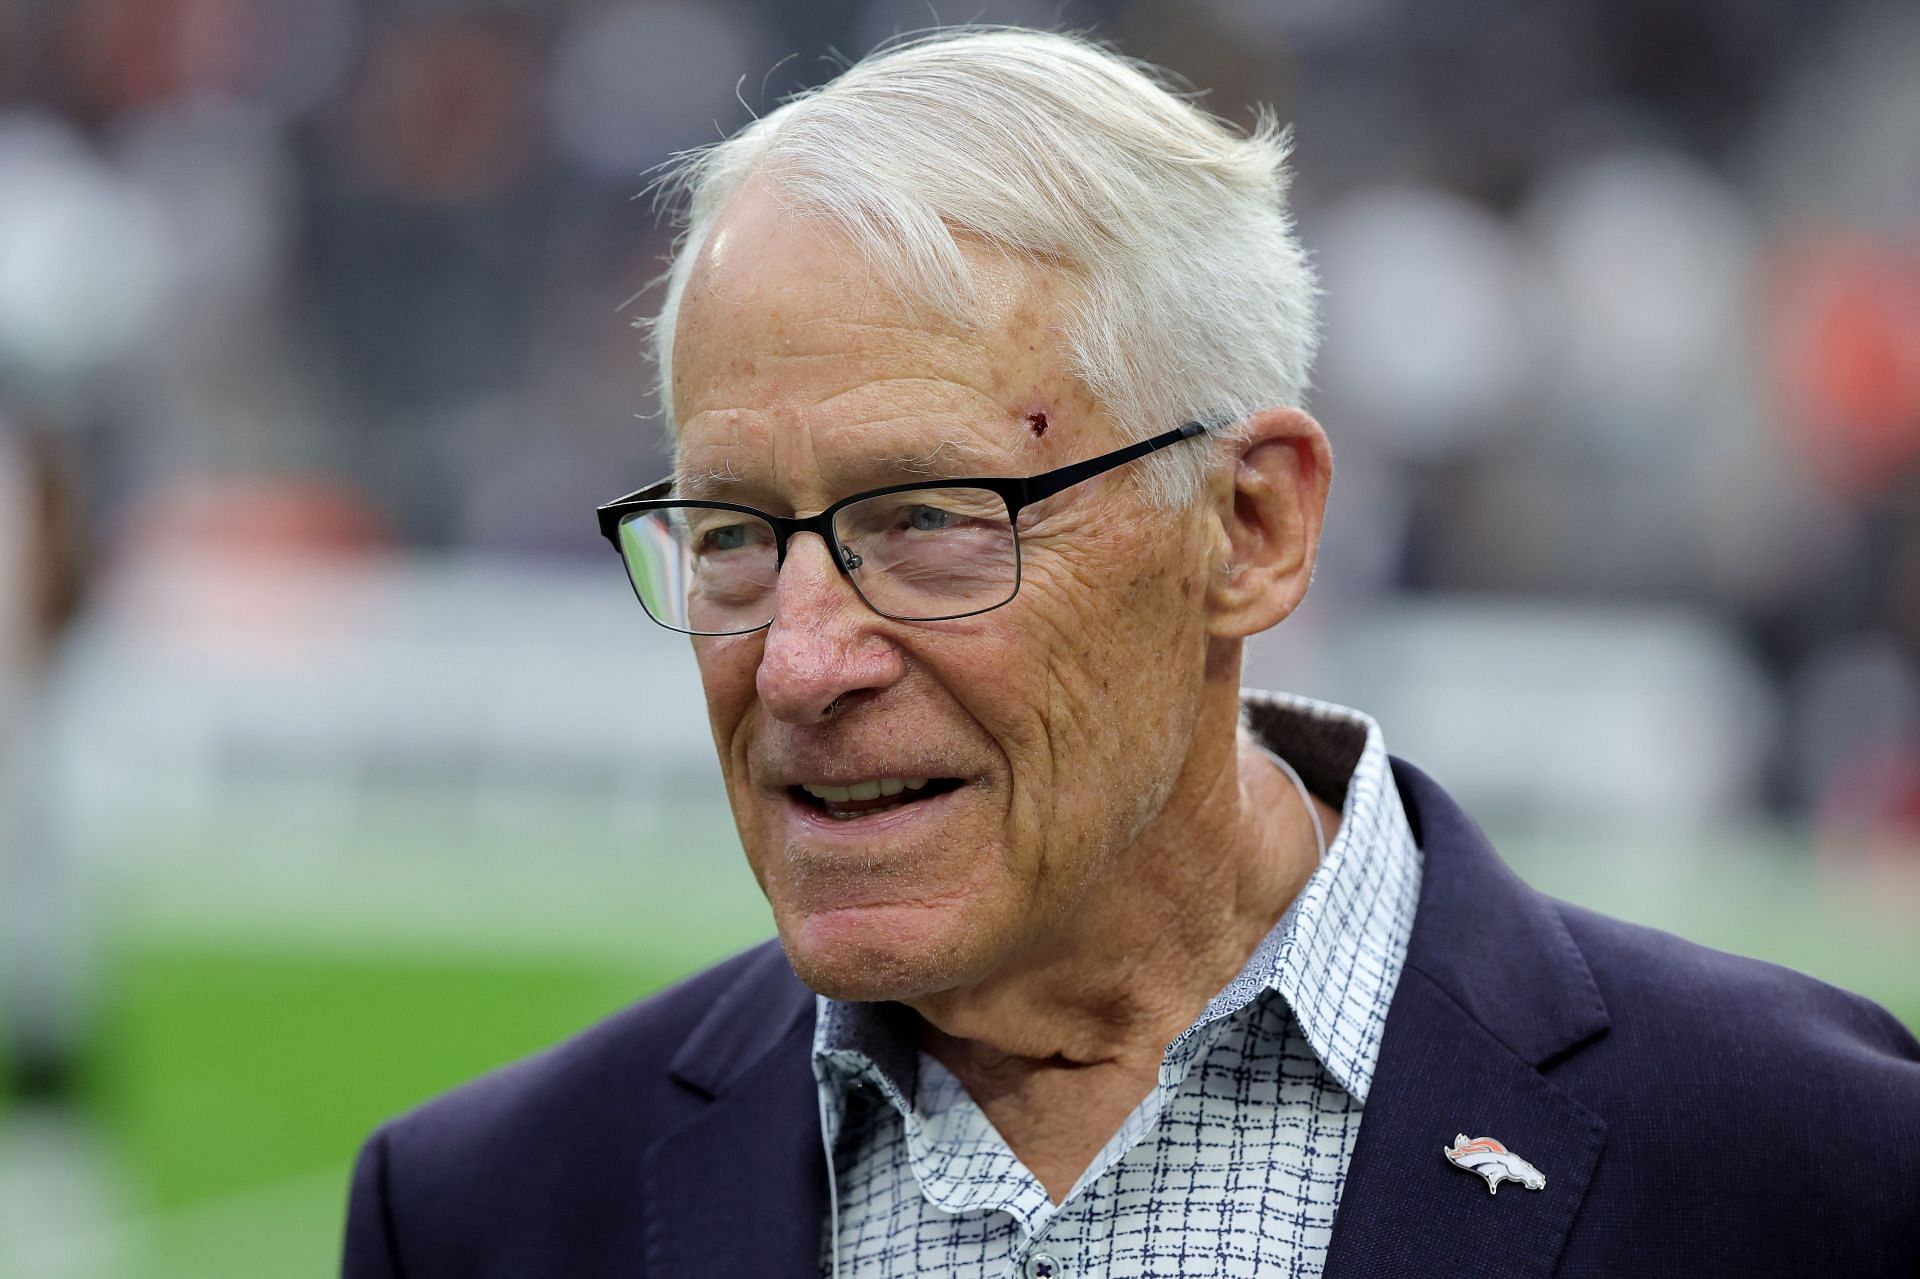 How much did the Broncos sell for? Comparing Commanders' new ownership deal  to the deal by Walmart heir Rob Walton